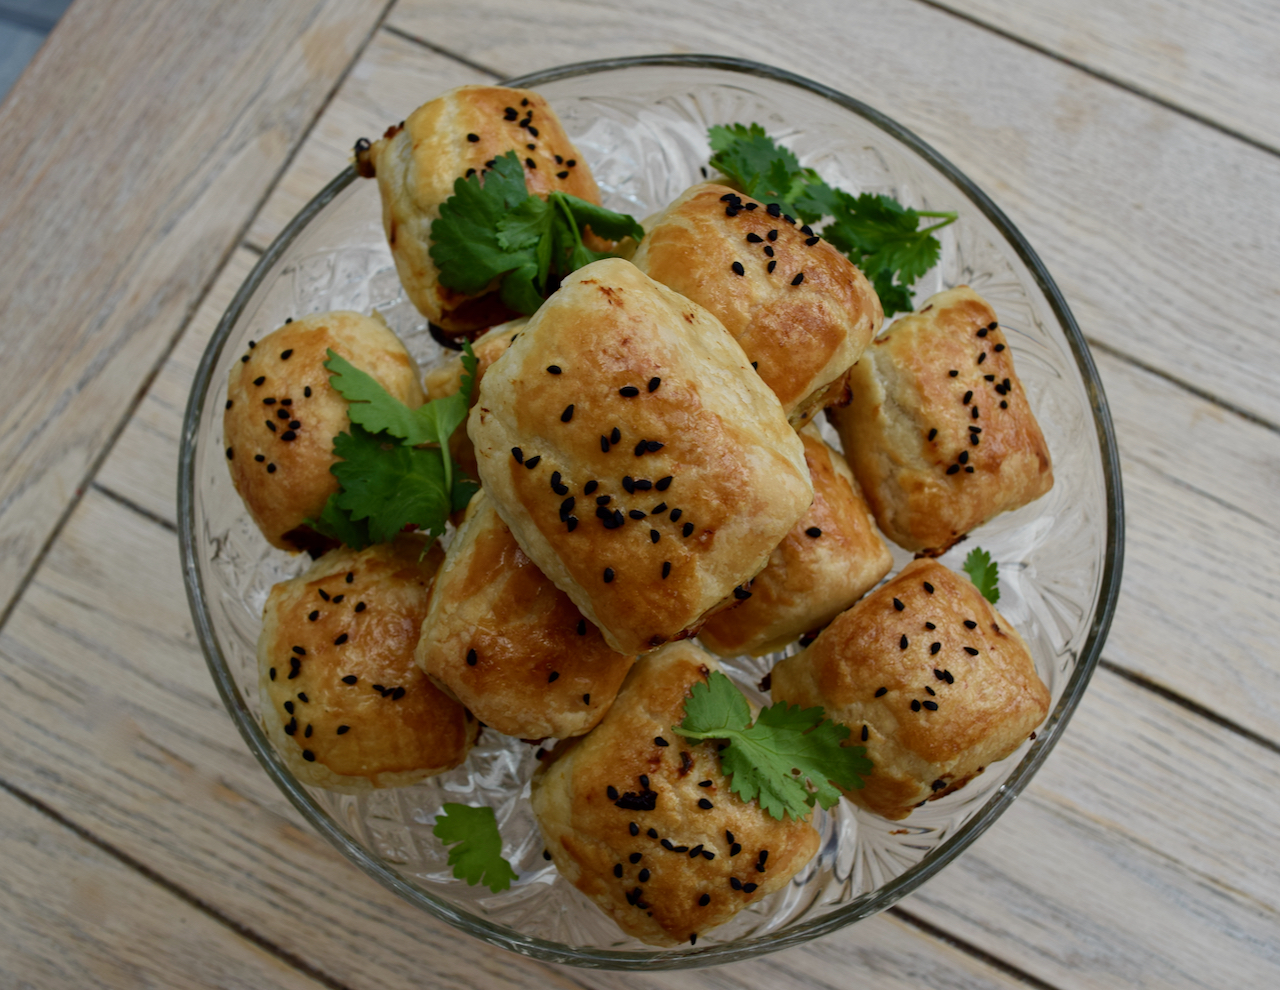 Coronation Chicken Sausage Rolls recipe from Lucy Loves